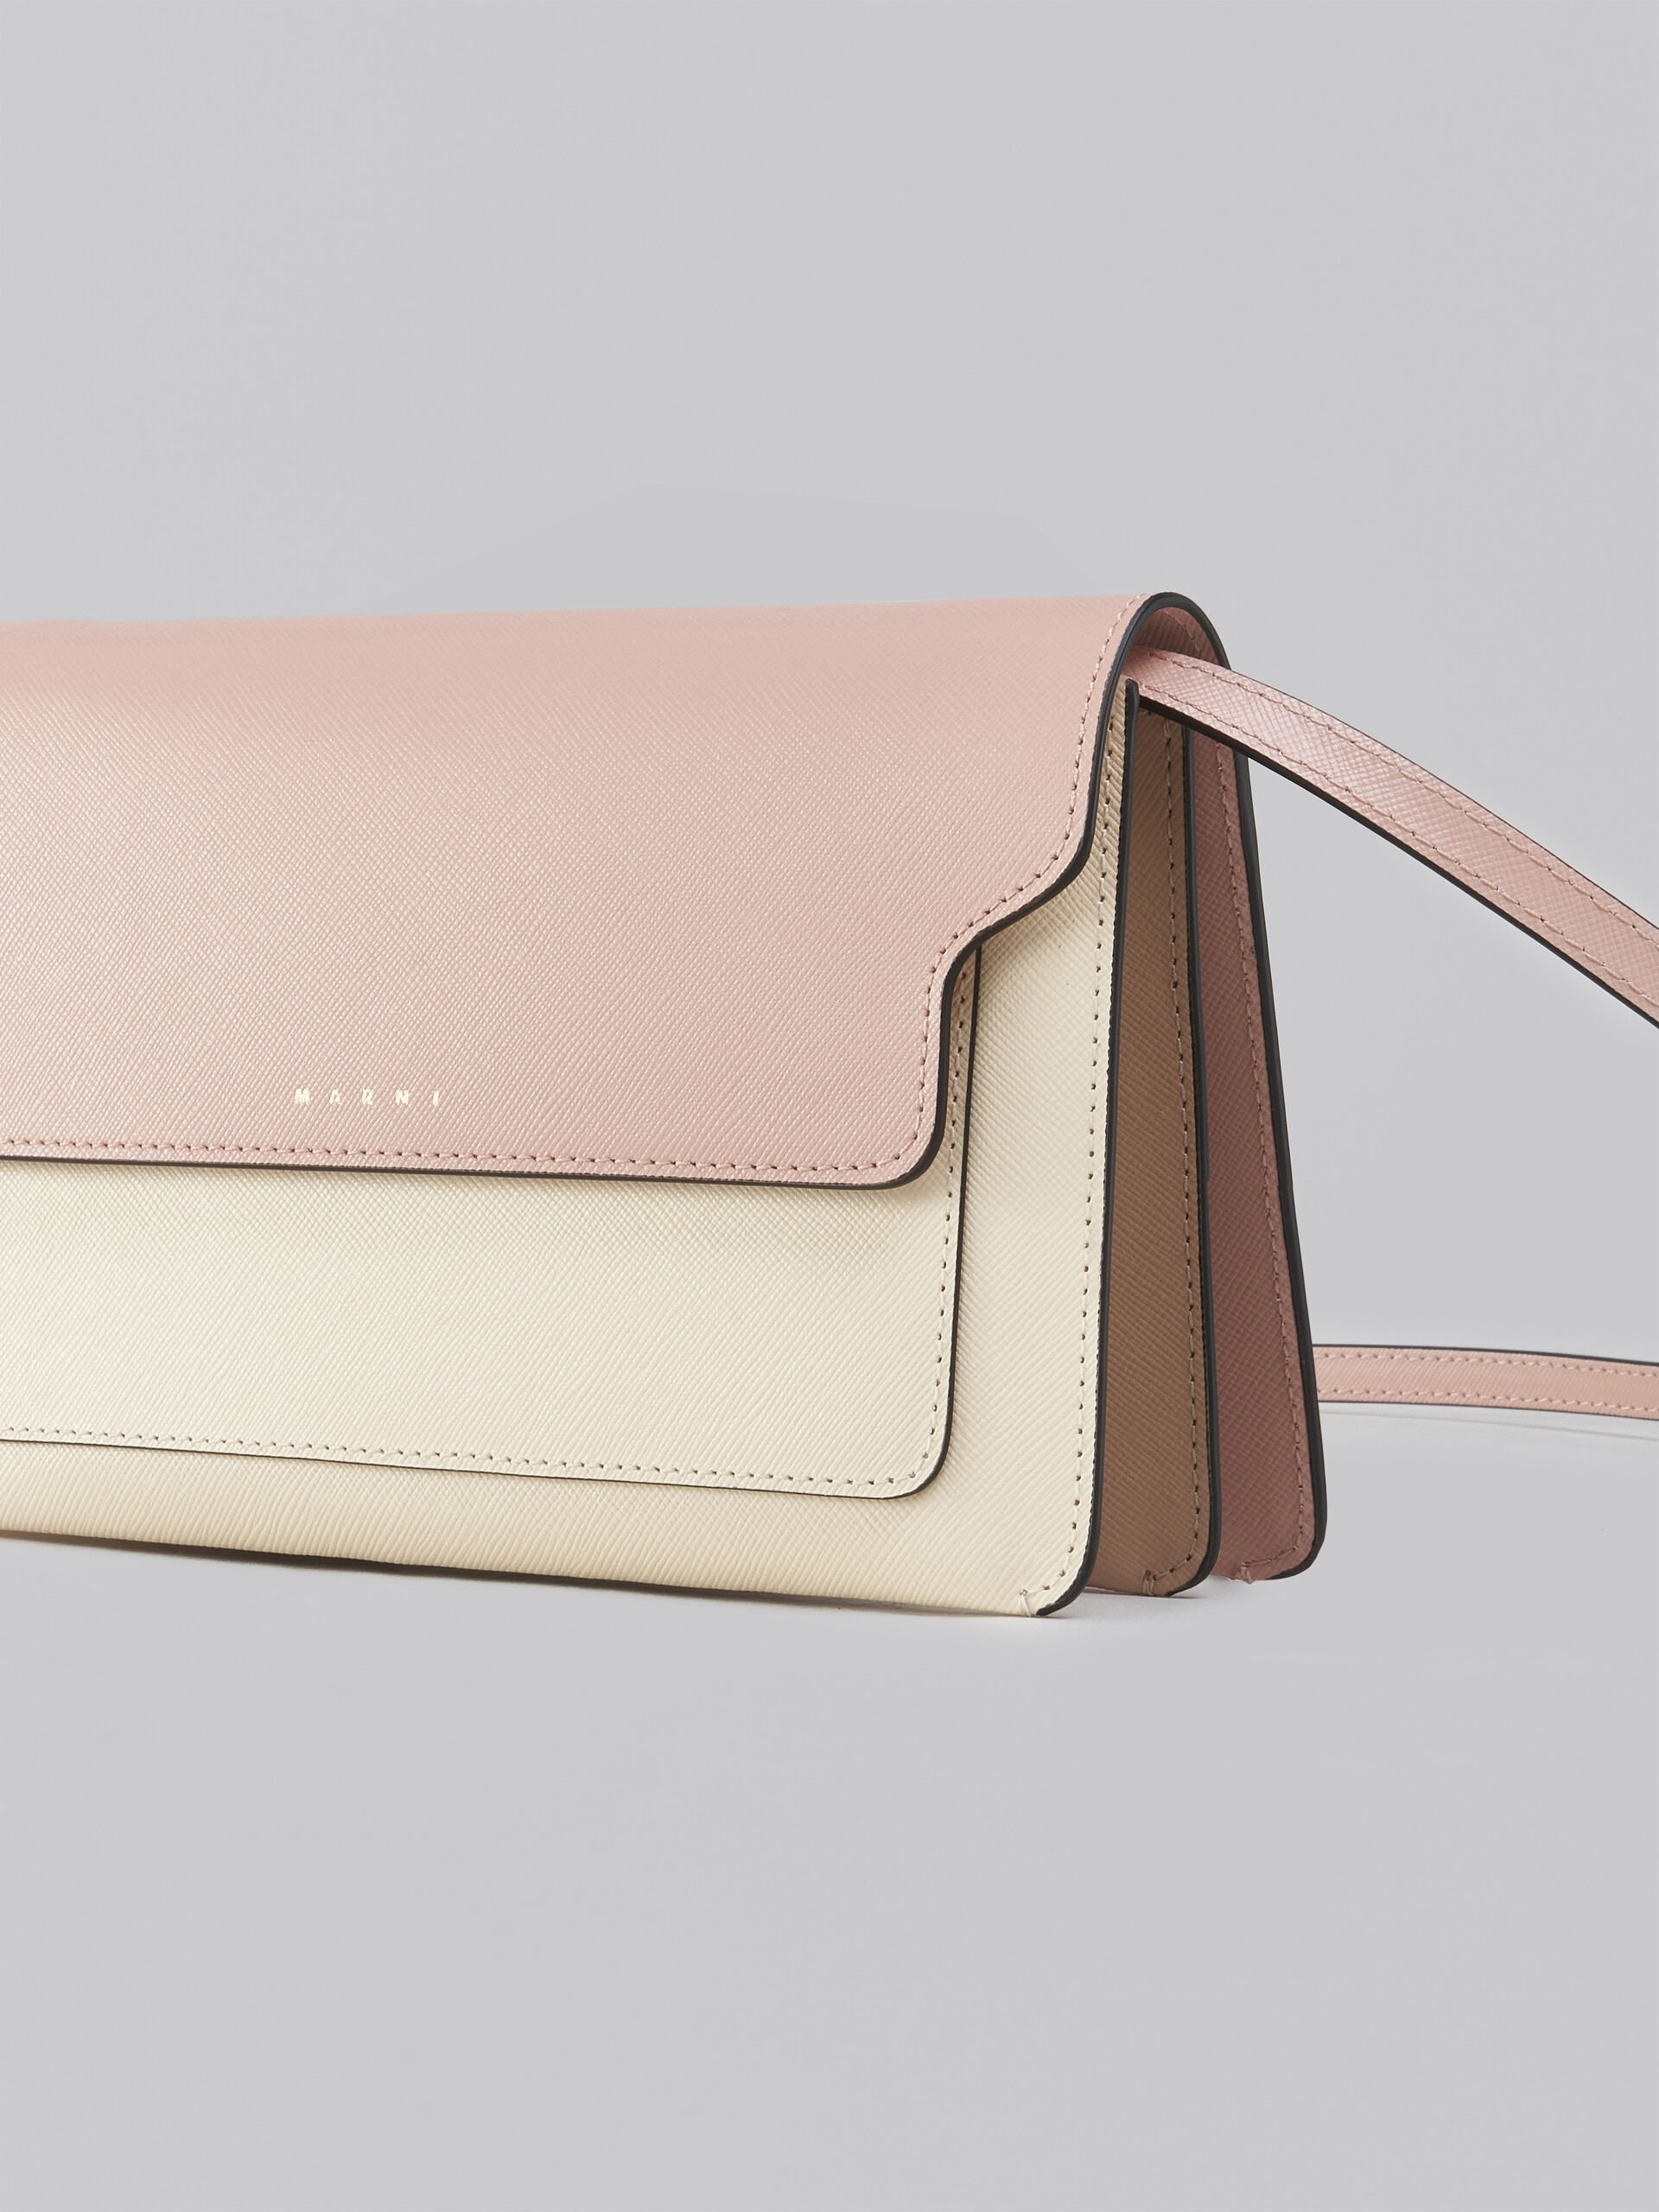 Trunk Clutch in pink white and beige saffiano leather - Pochettes - Image 5